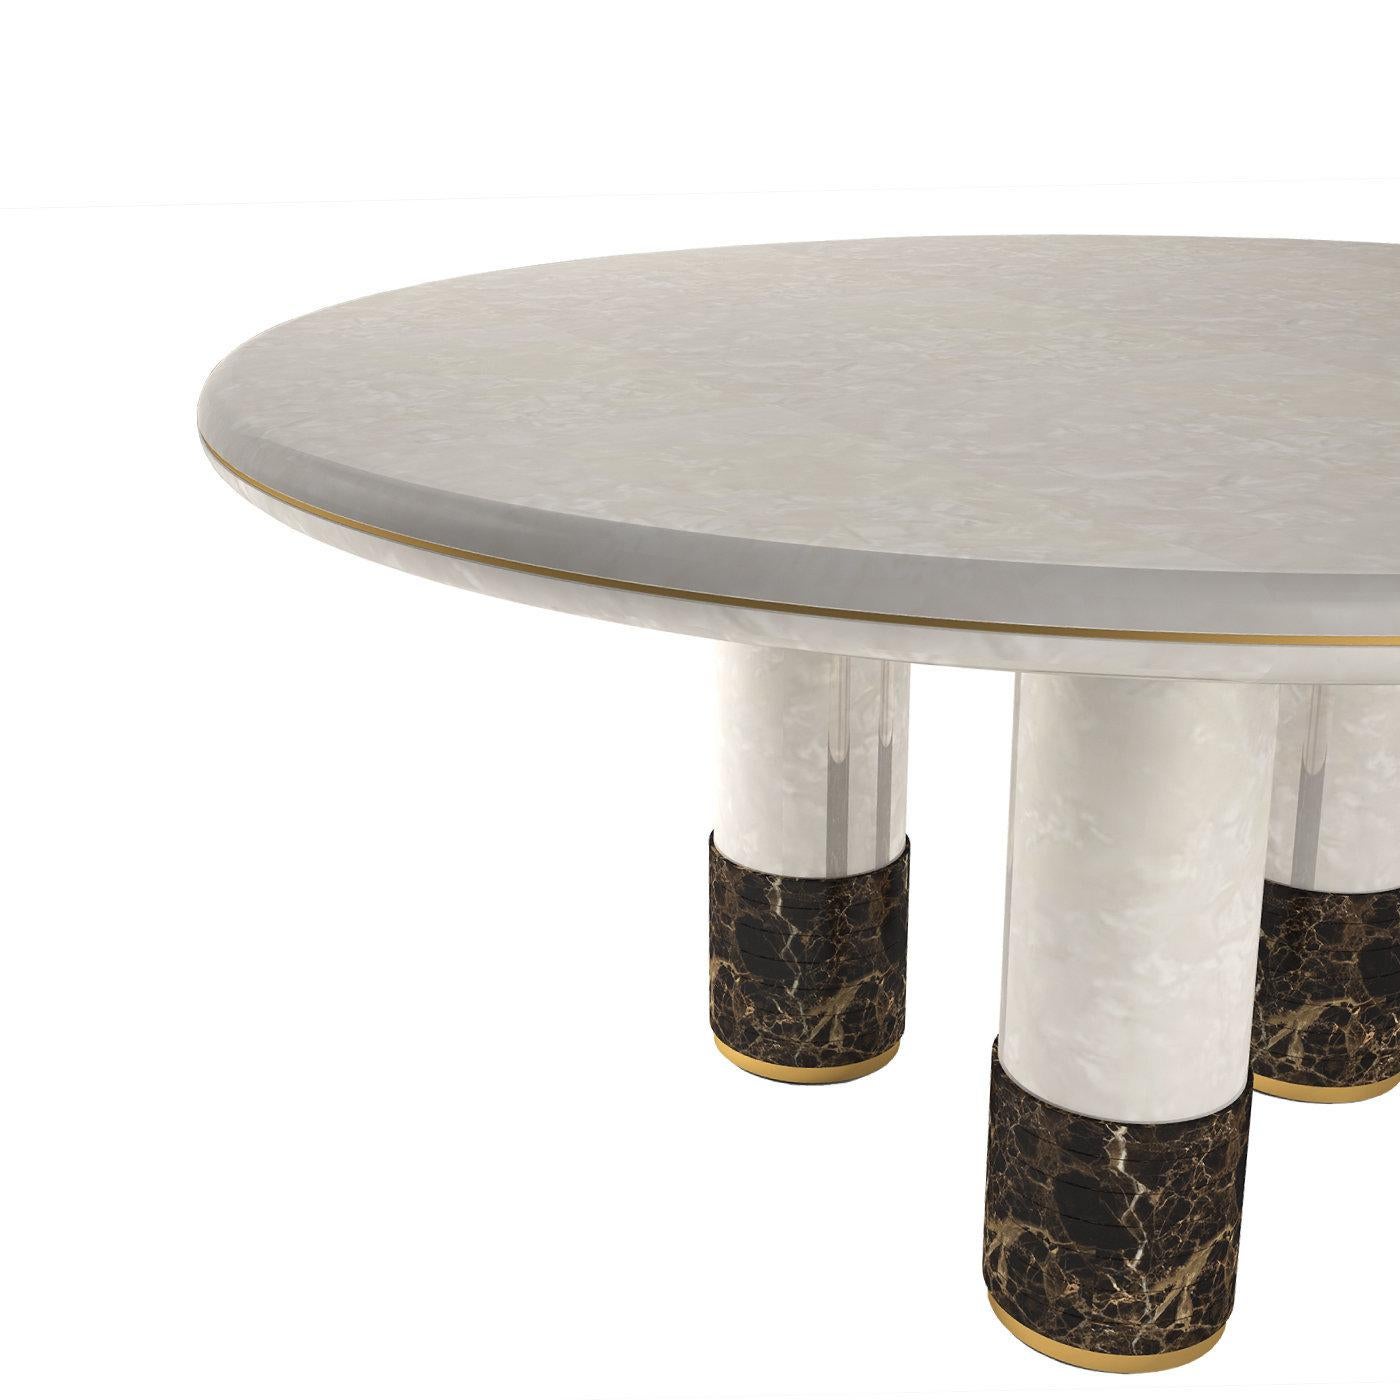 Bold and stately in its absolutely refined and charming choice of finishes and first-rate materials, this stunning dining table will create a plush and warm focal point in a contemporary interior. Fashioned of wood, it rests on three sturdy